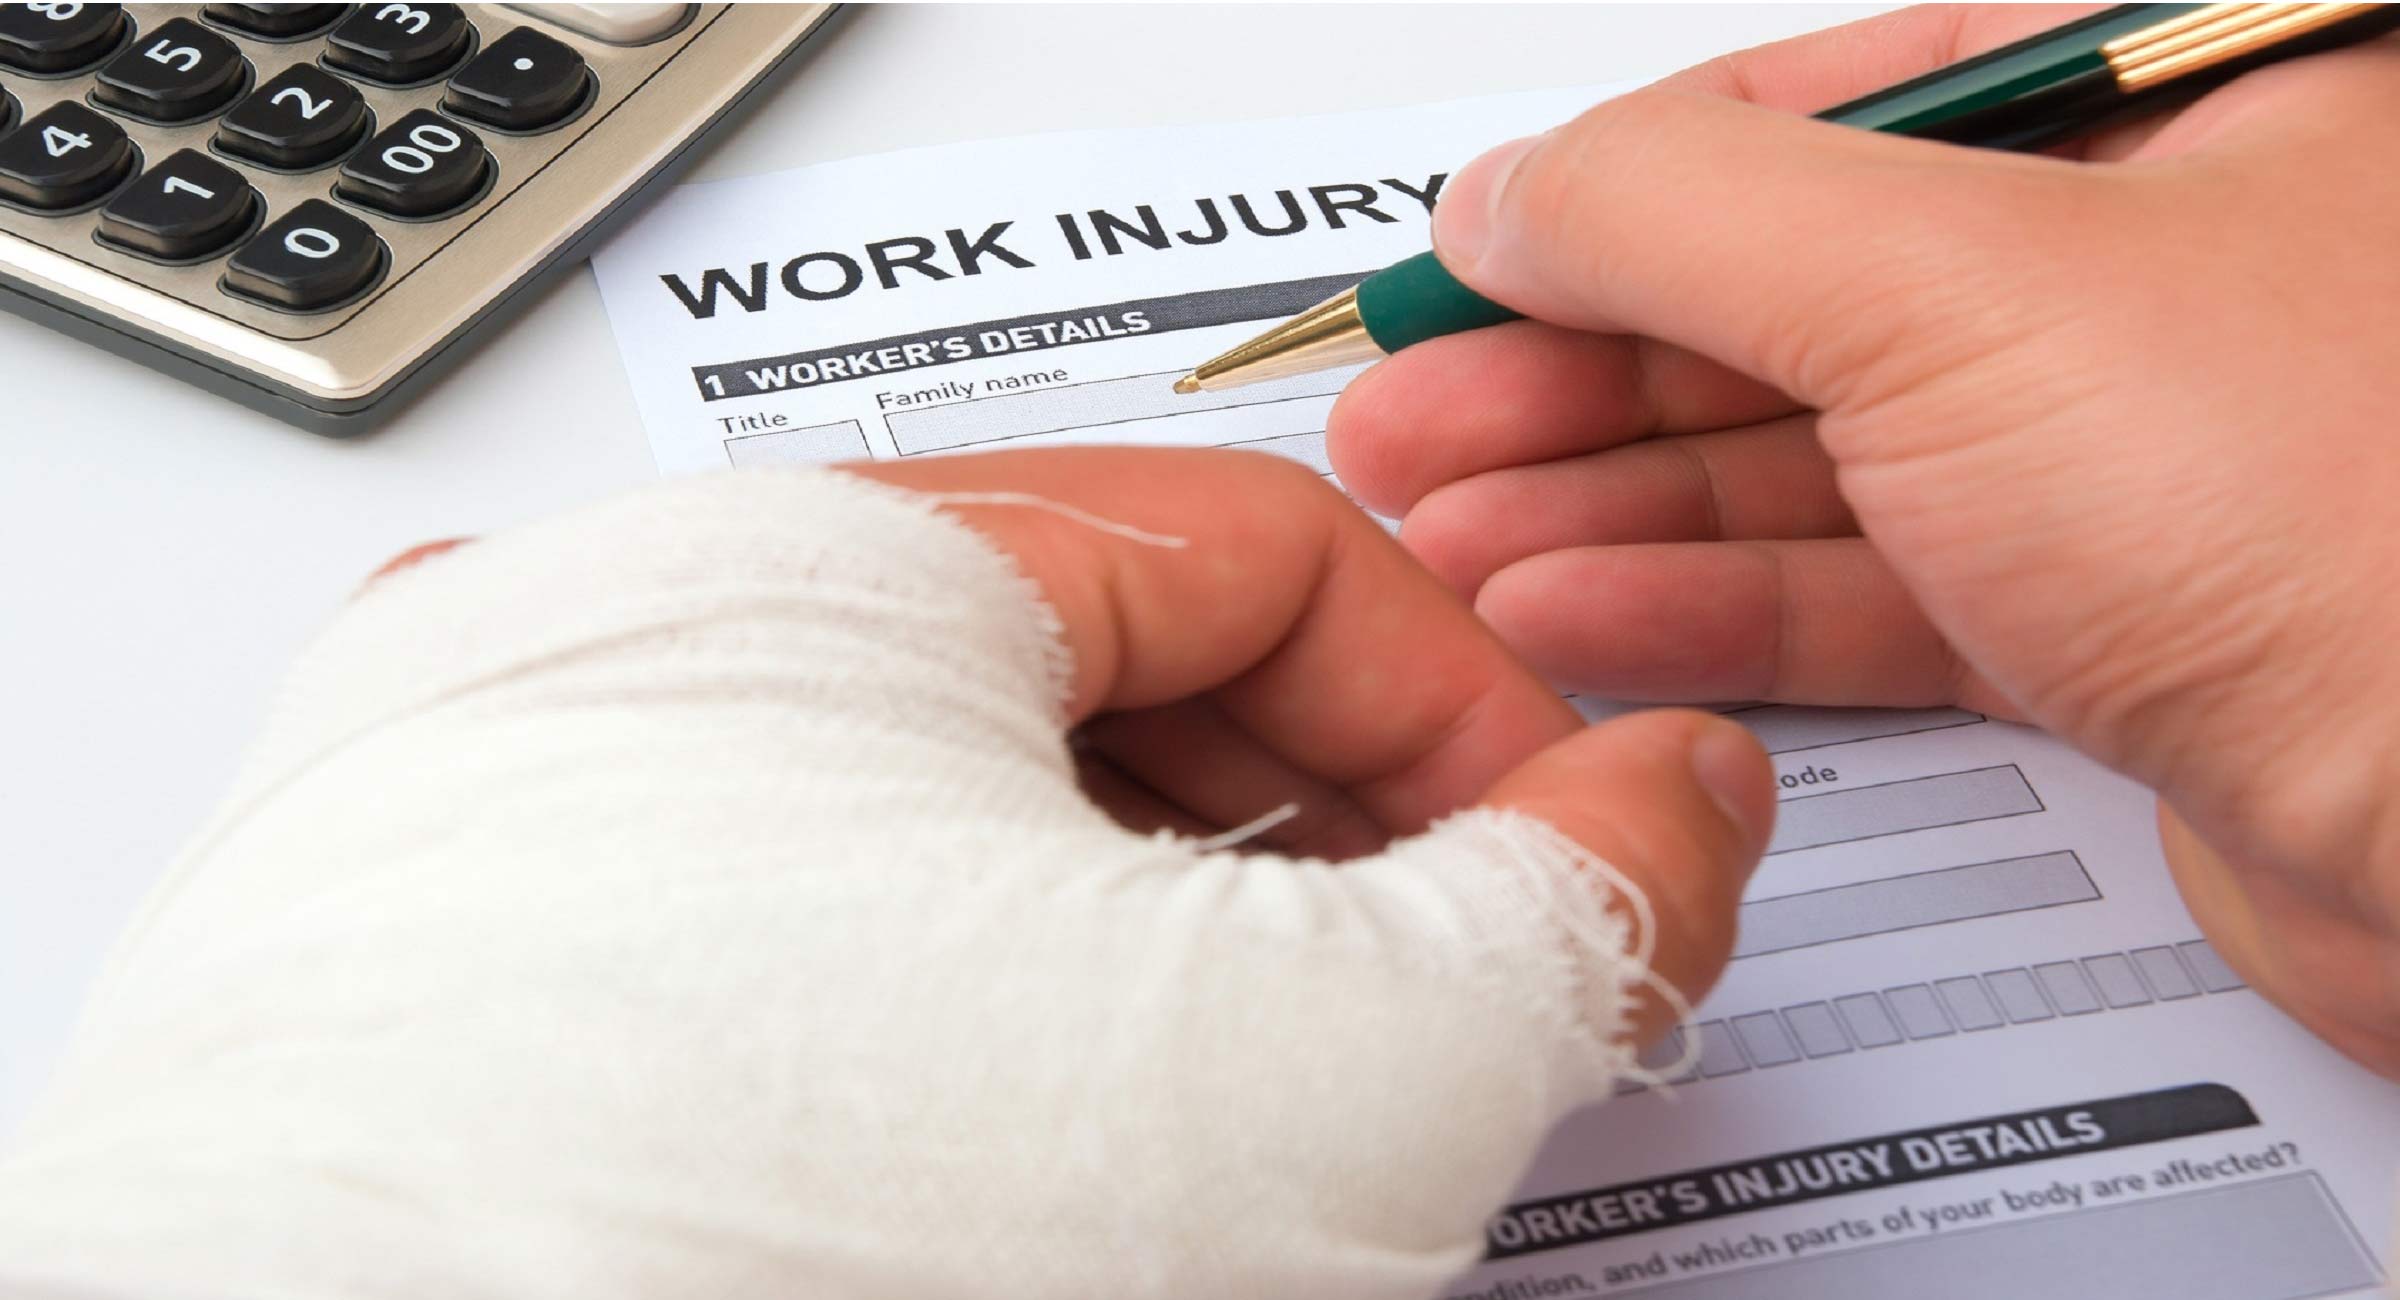 Injured on the Job? Know your rights. Don’t get taken advantage of by employers or insurance companies. Call us Today for a free consultation!